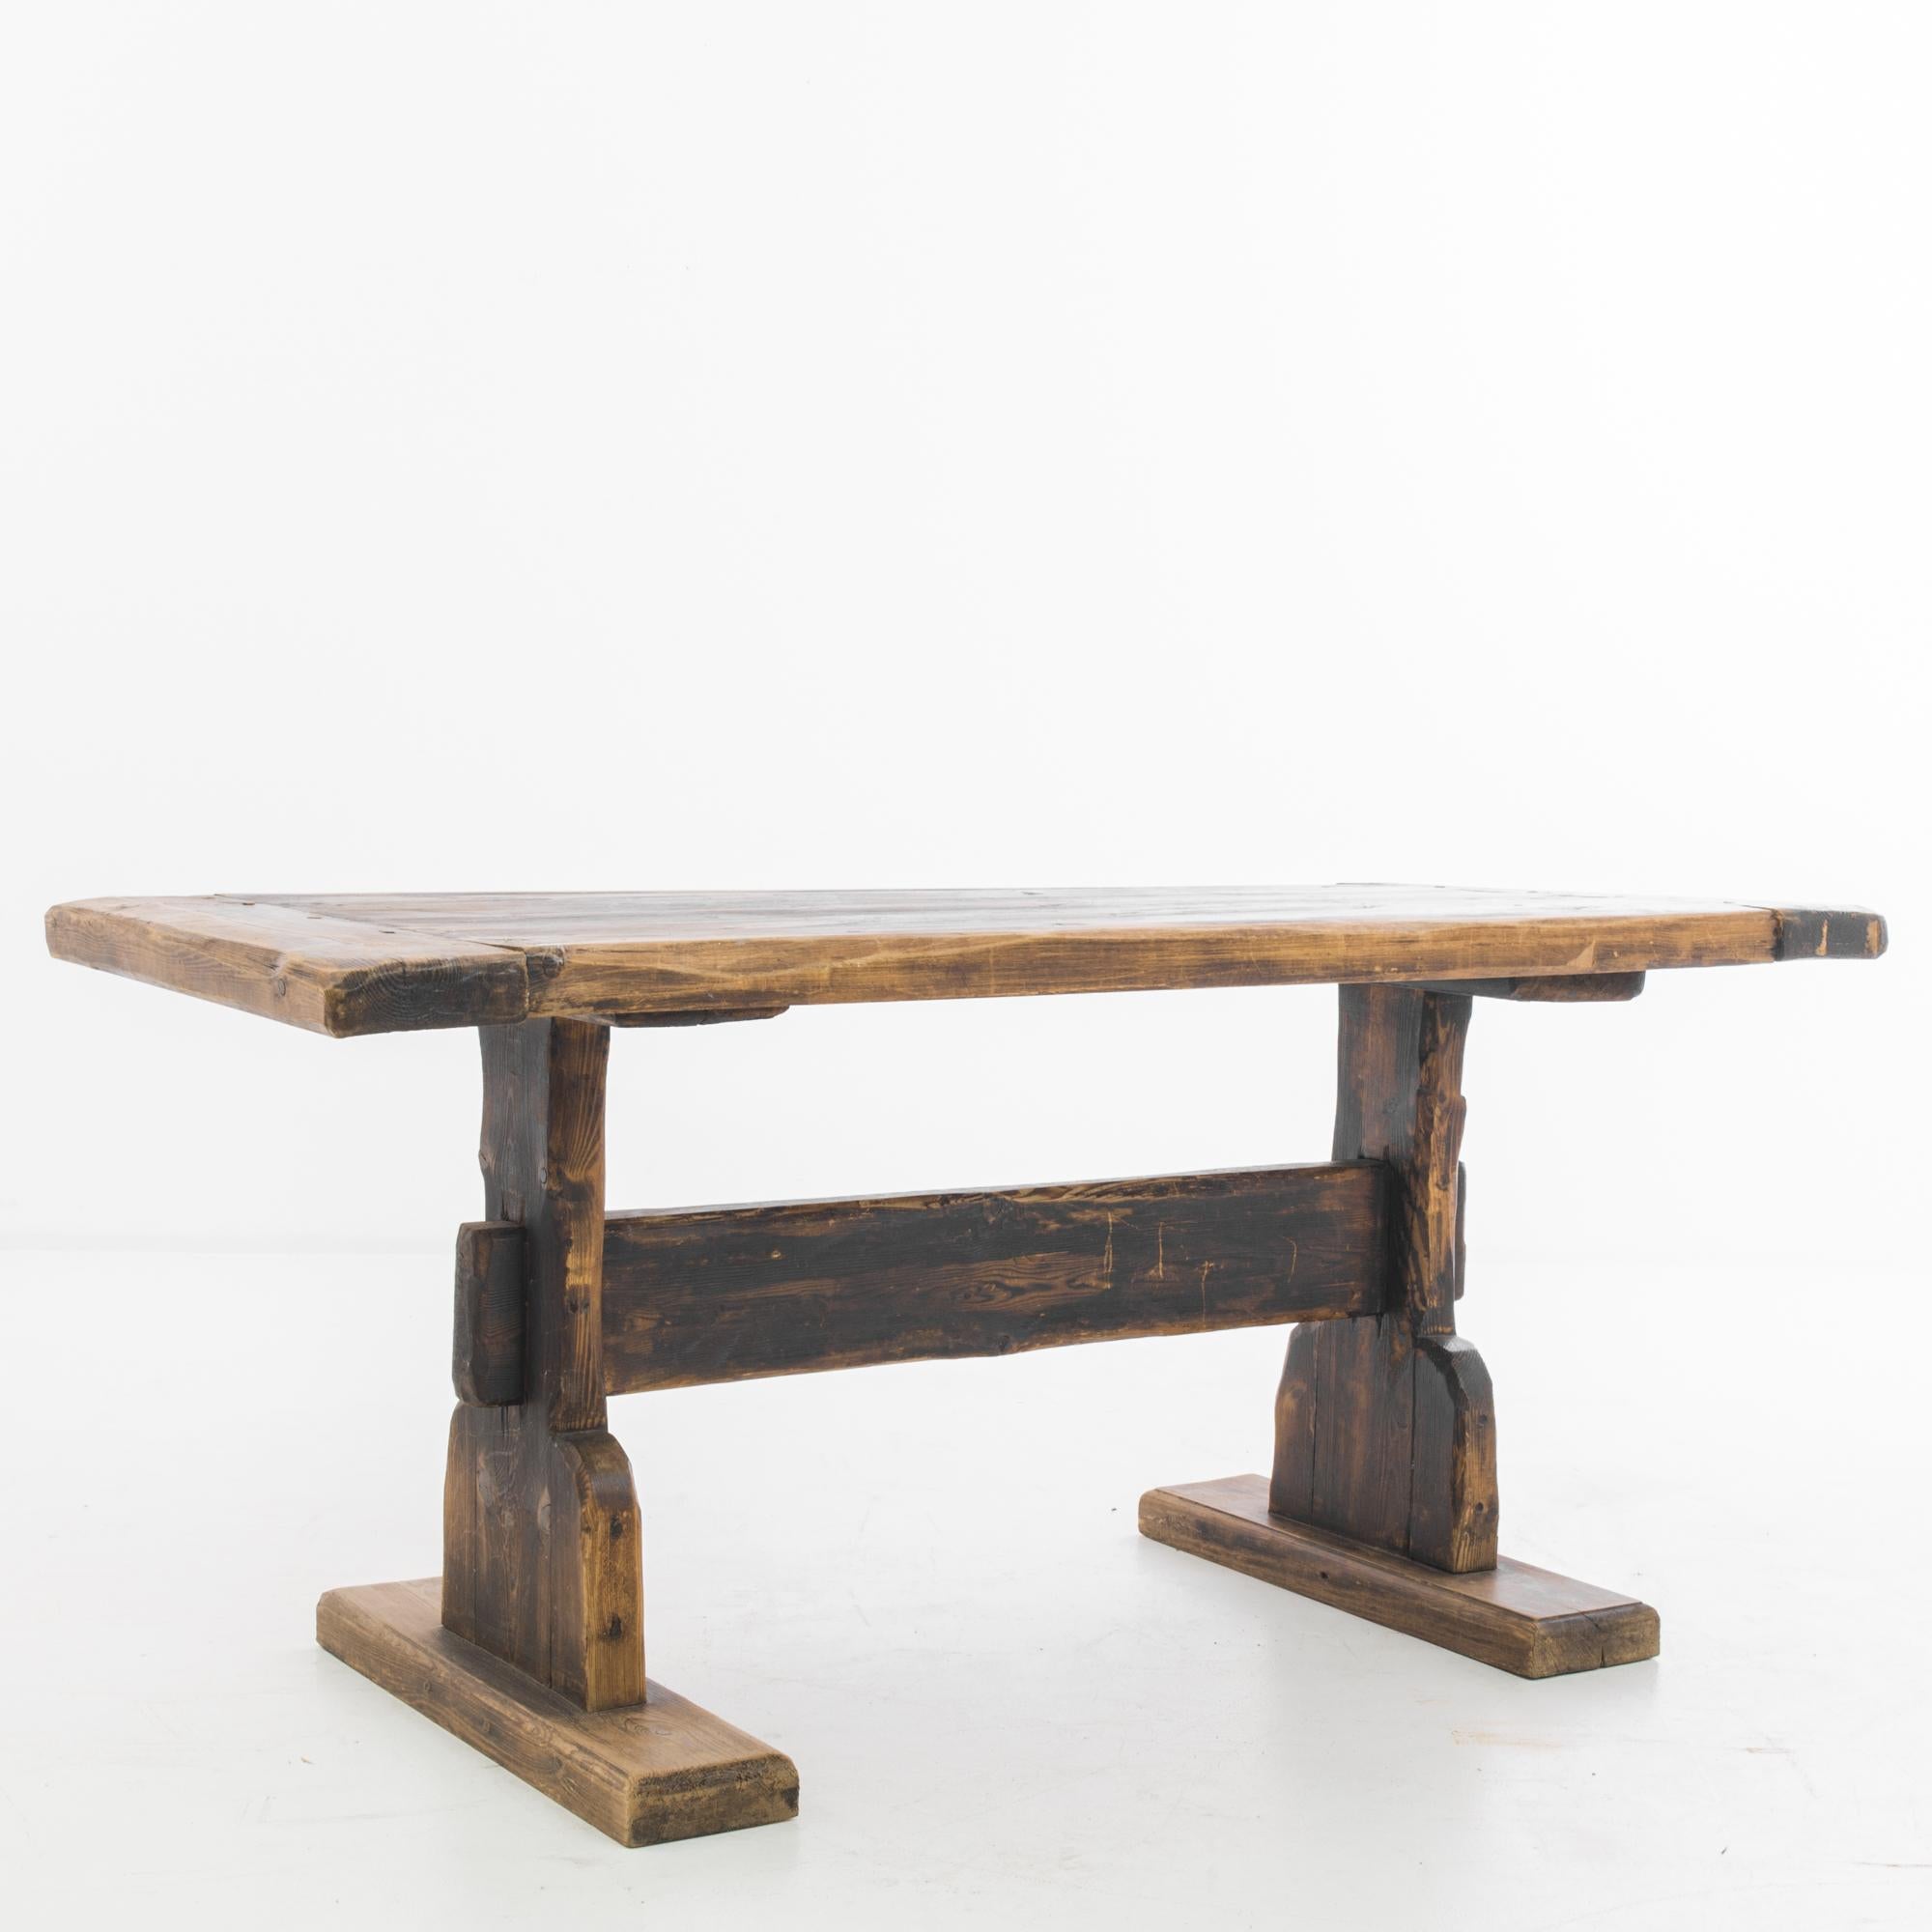 Rustic 1920s French Country Wooden Table